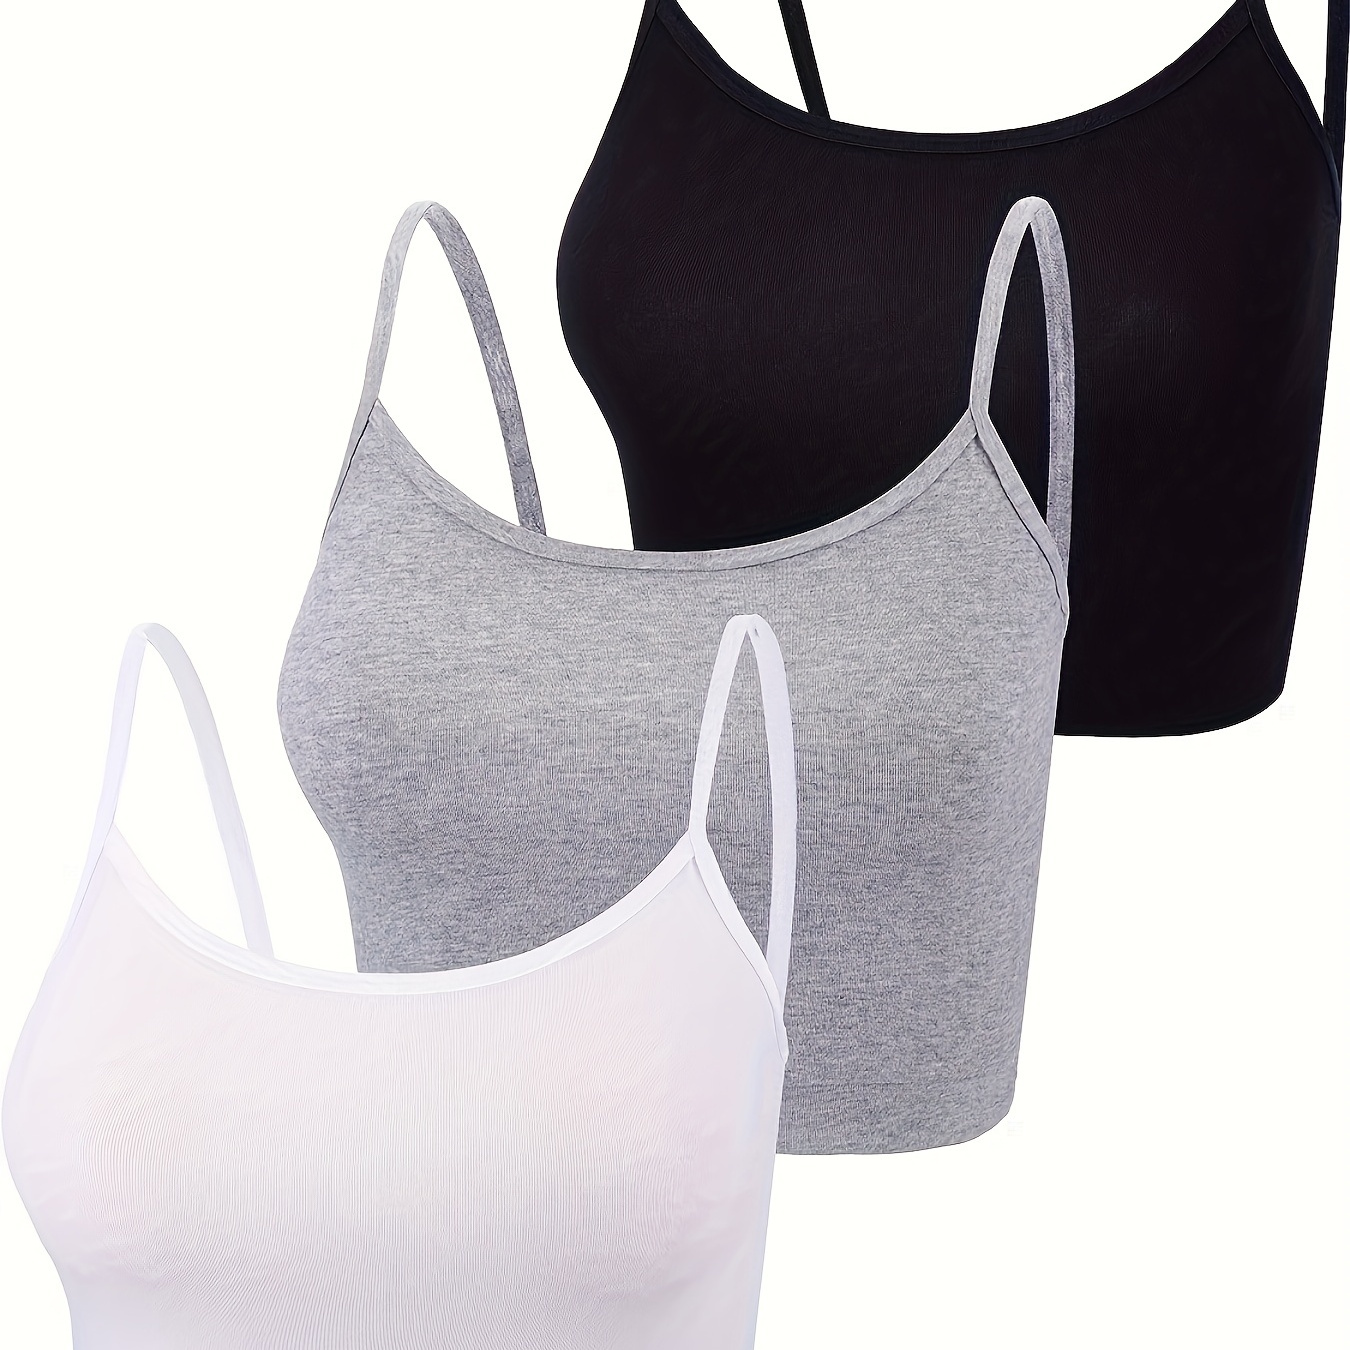 

3 Packs Mixed Color Crop Cami Tops, Casual Summer Sleeveless Top, Women's Clothing